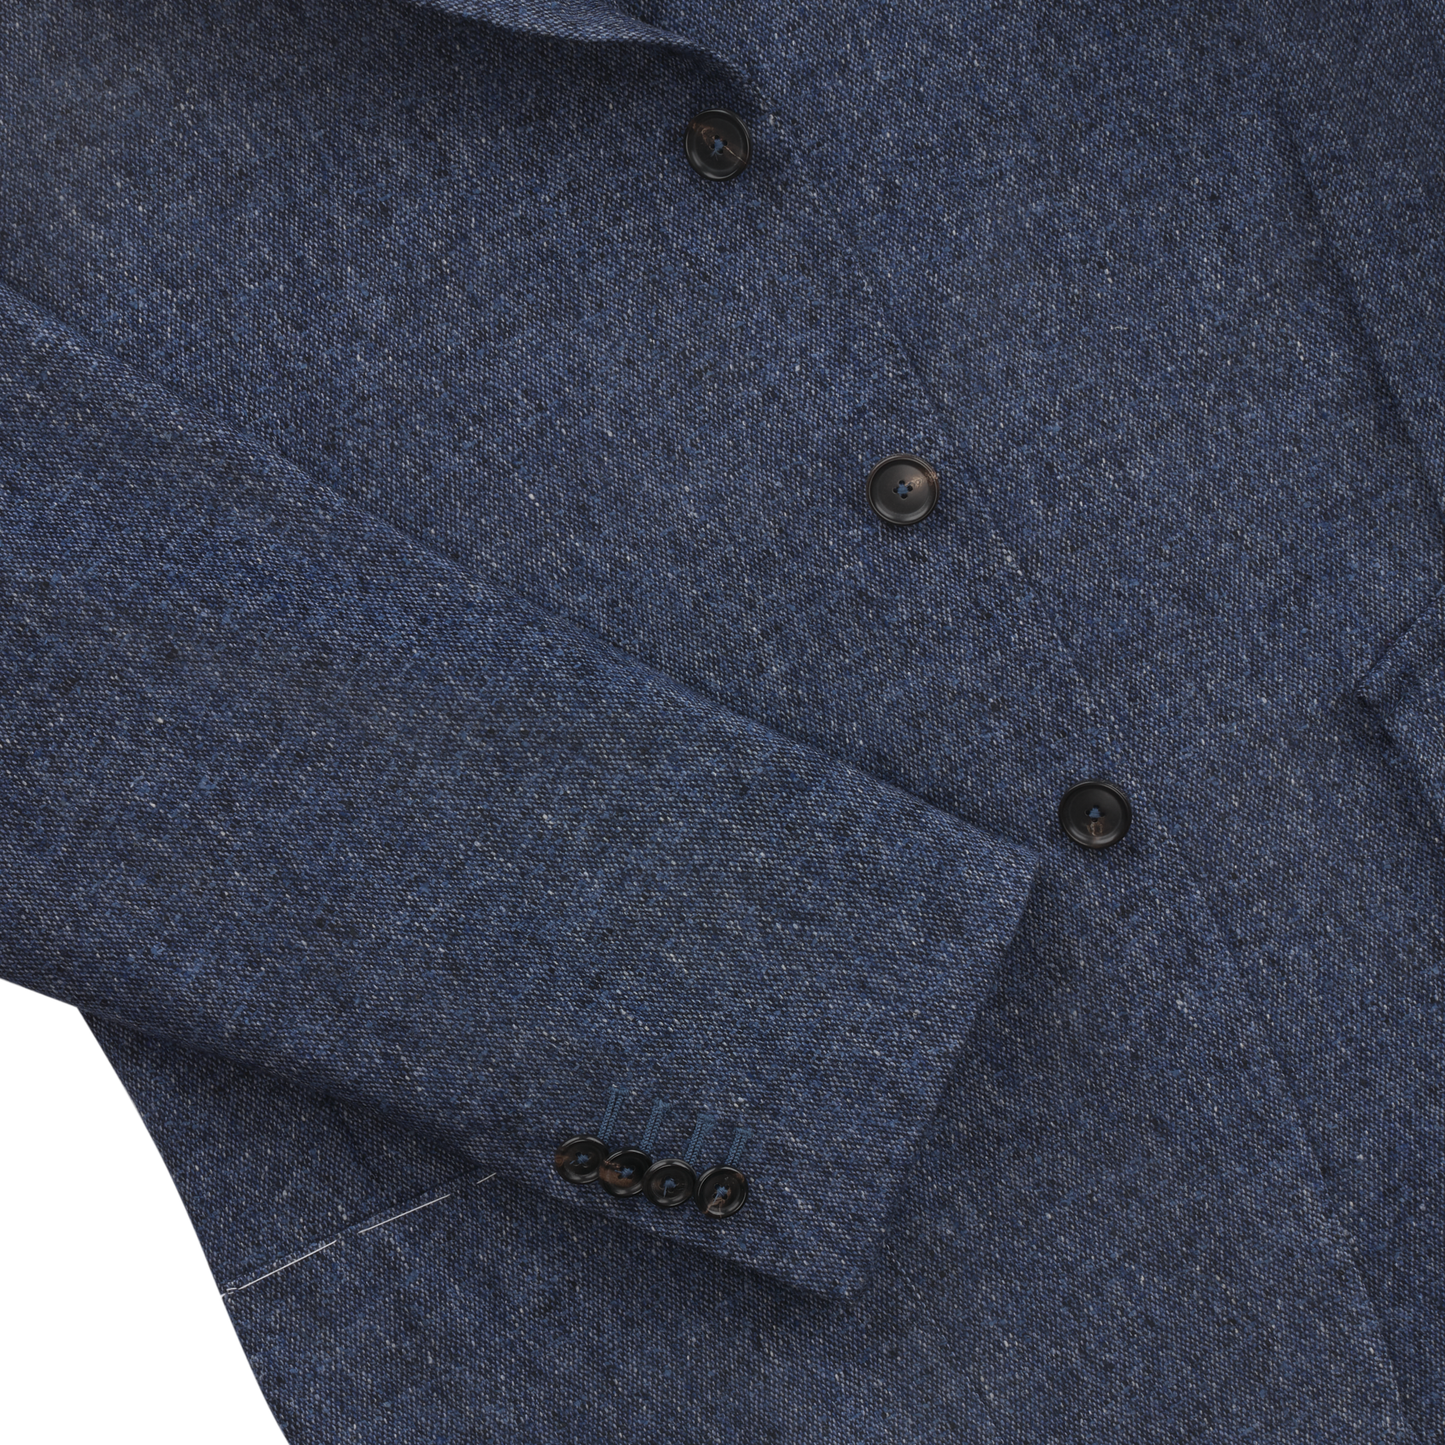 De Petrillo Single-Breasted Virgin Wool Jacket in Blue. Exclusively Made for Sartale - SARTALE